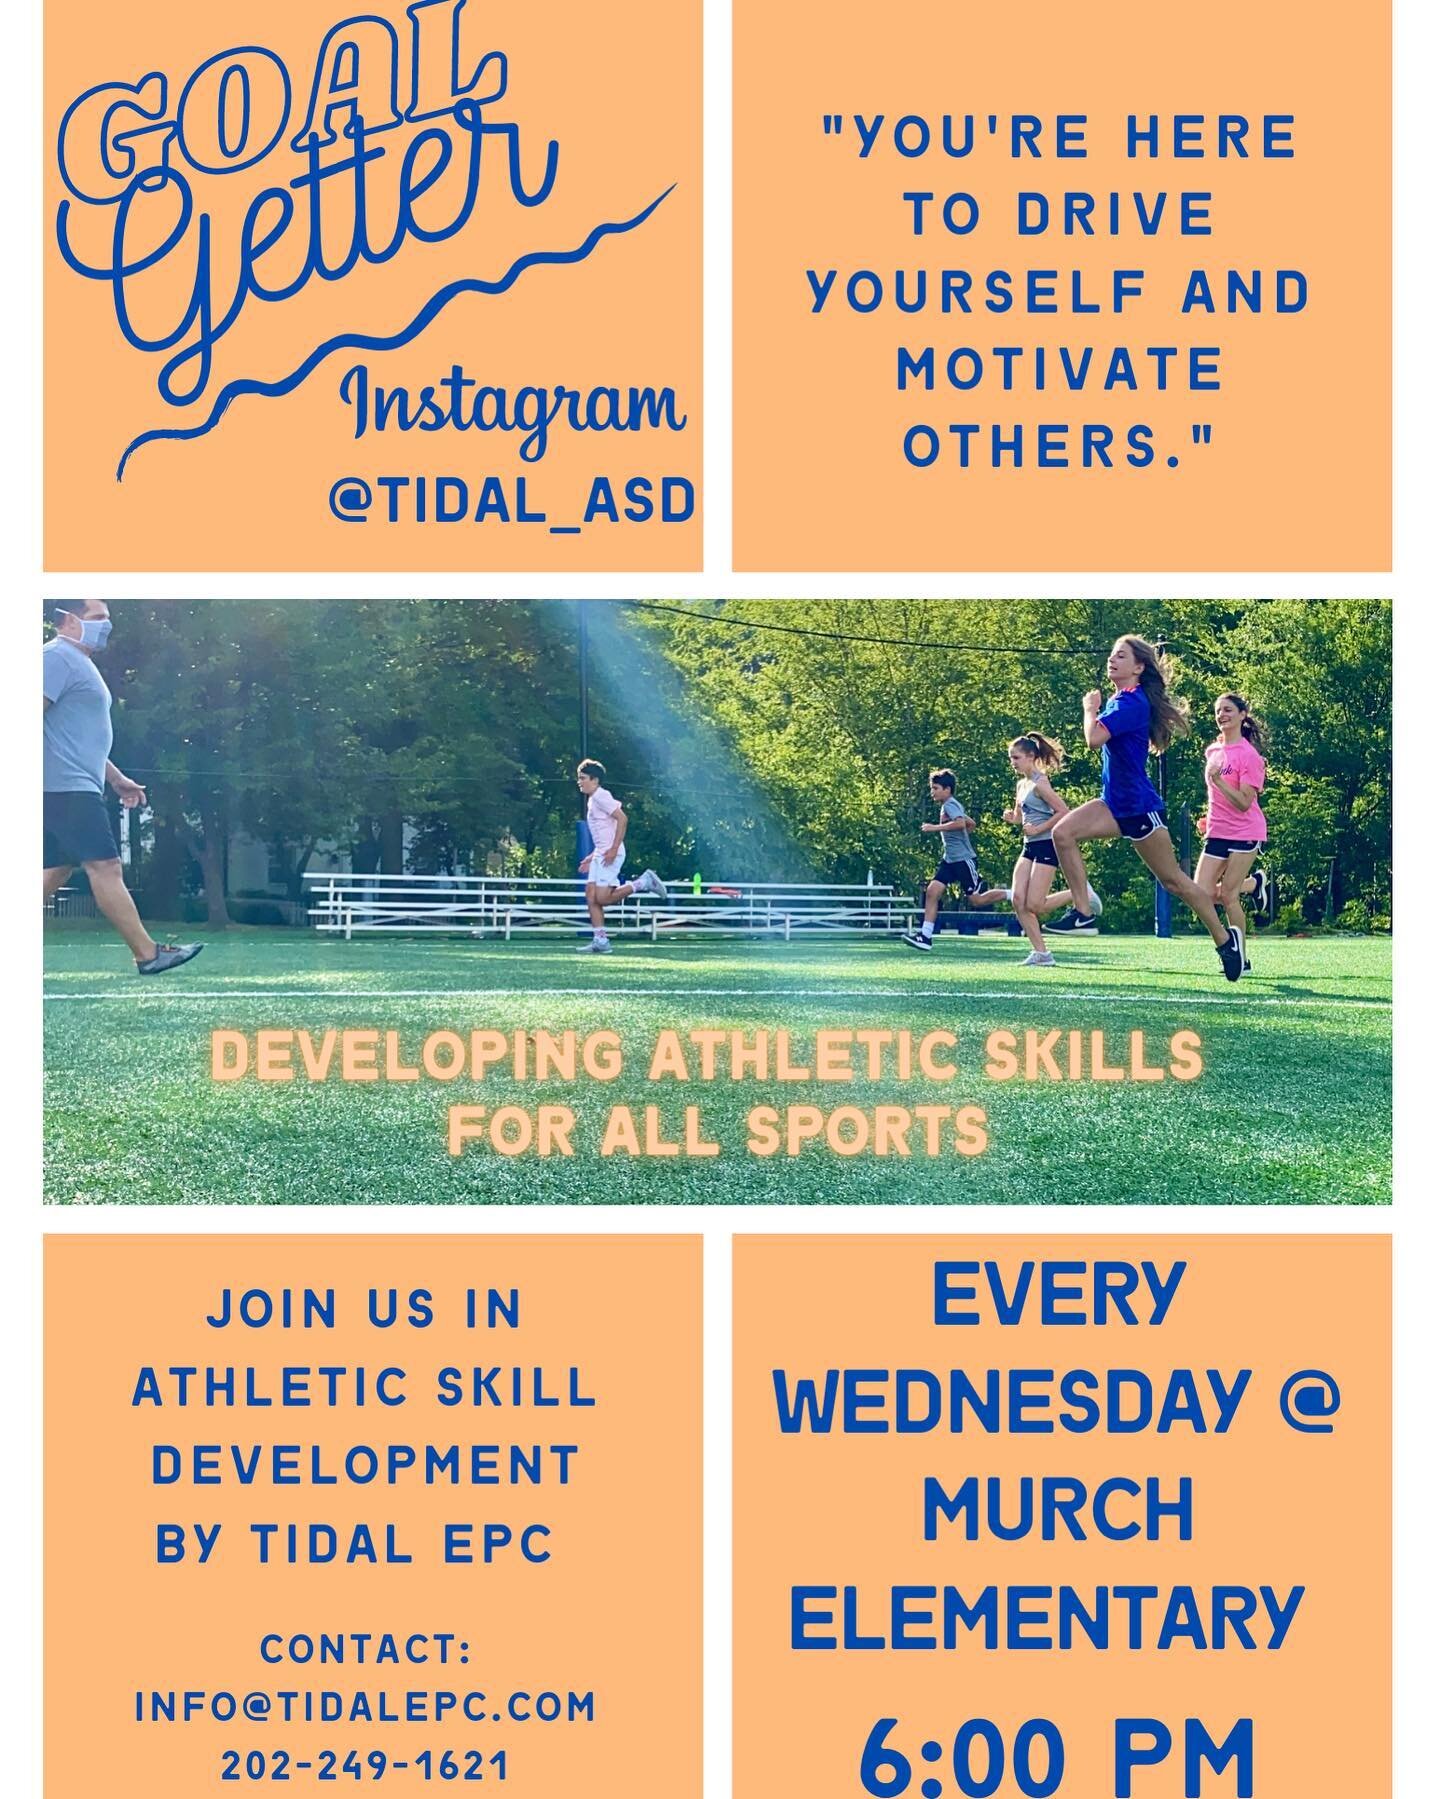 Looking forward to seeing everyone tonight! If you haven&rsquo;t signed up yet, don&rsquo;t forget to on our website! Link in bio! 

#TidalASD #AthleticSkillDevelopment #TidalEPC #SportsSkill #Youth #DcYouth #DcTraining #DcPersonalTraining #DcYouthPr